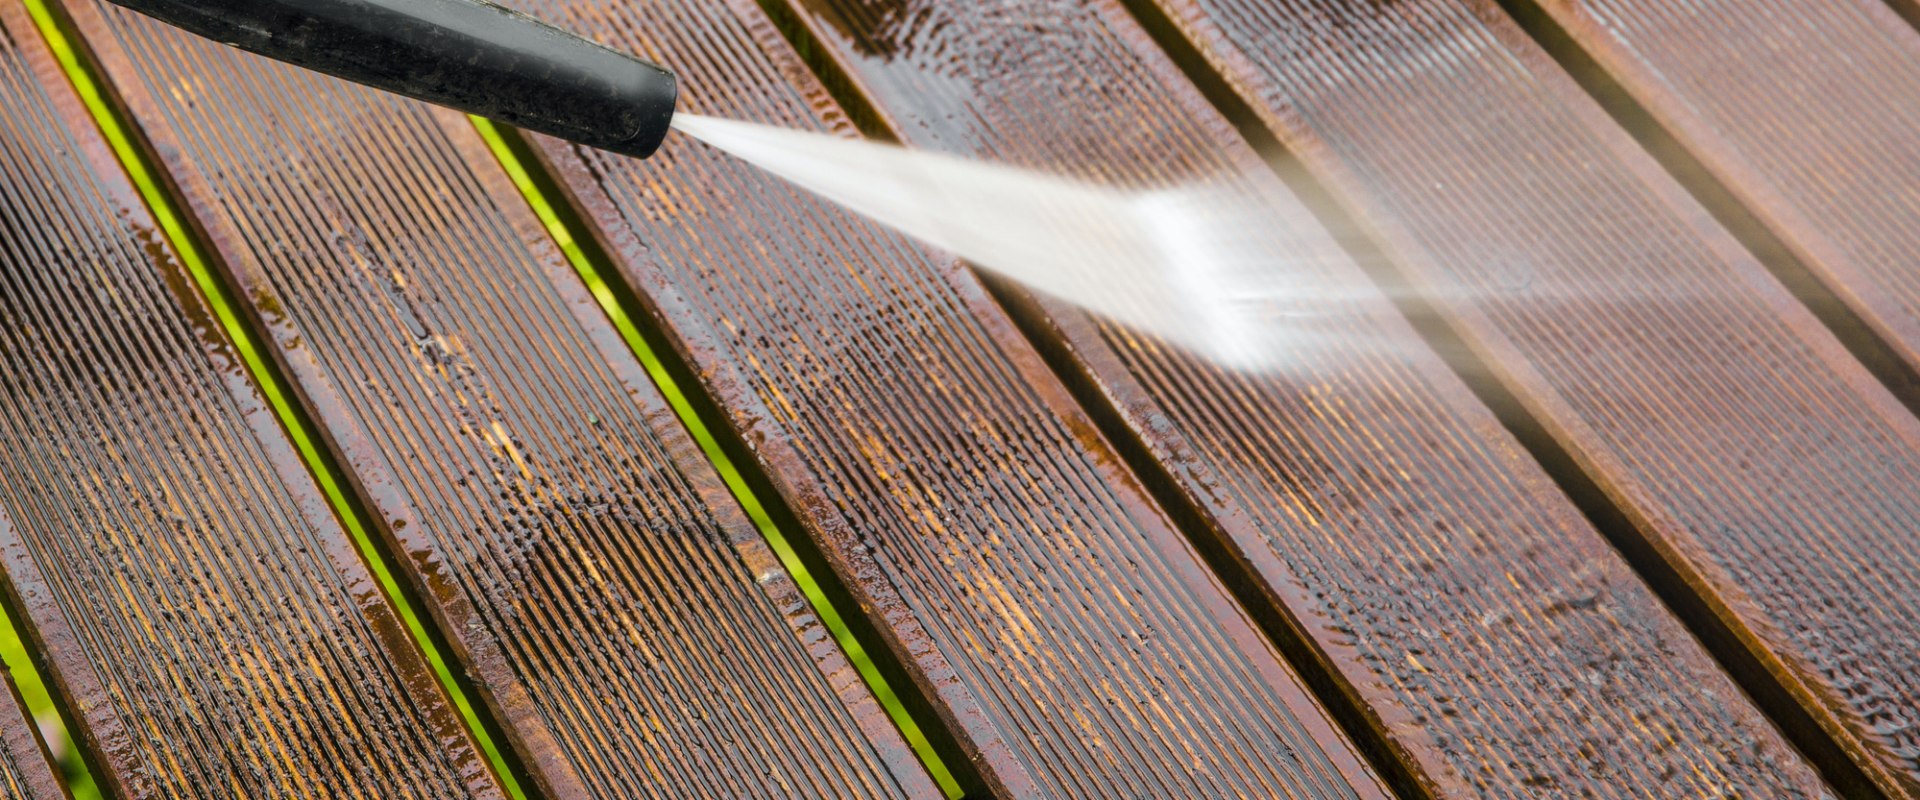 Why you should not pressure wash wood?